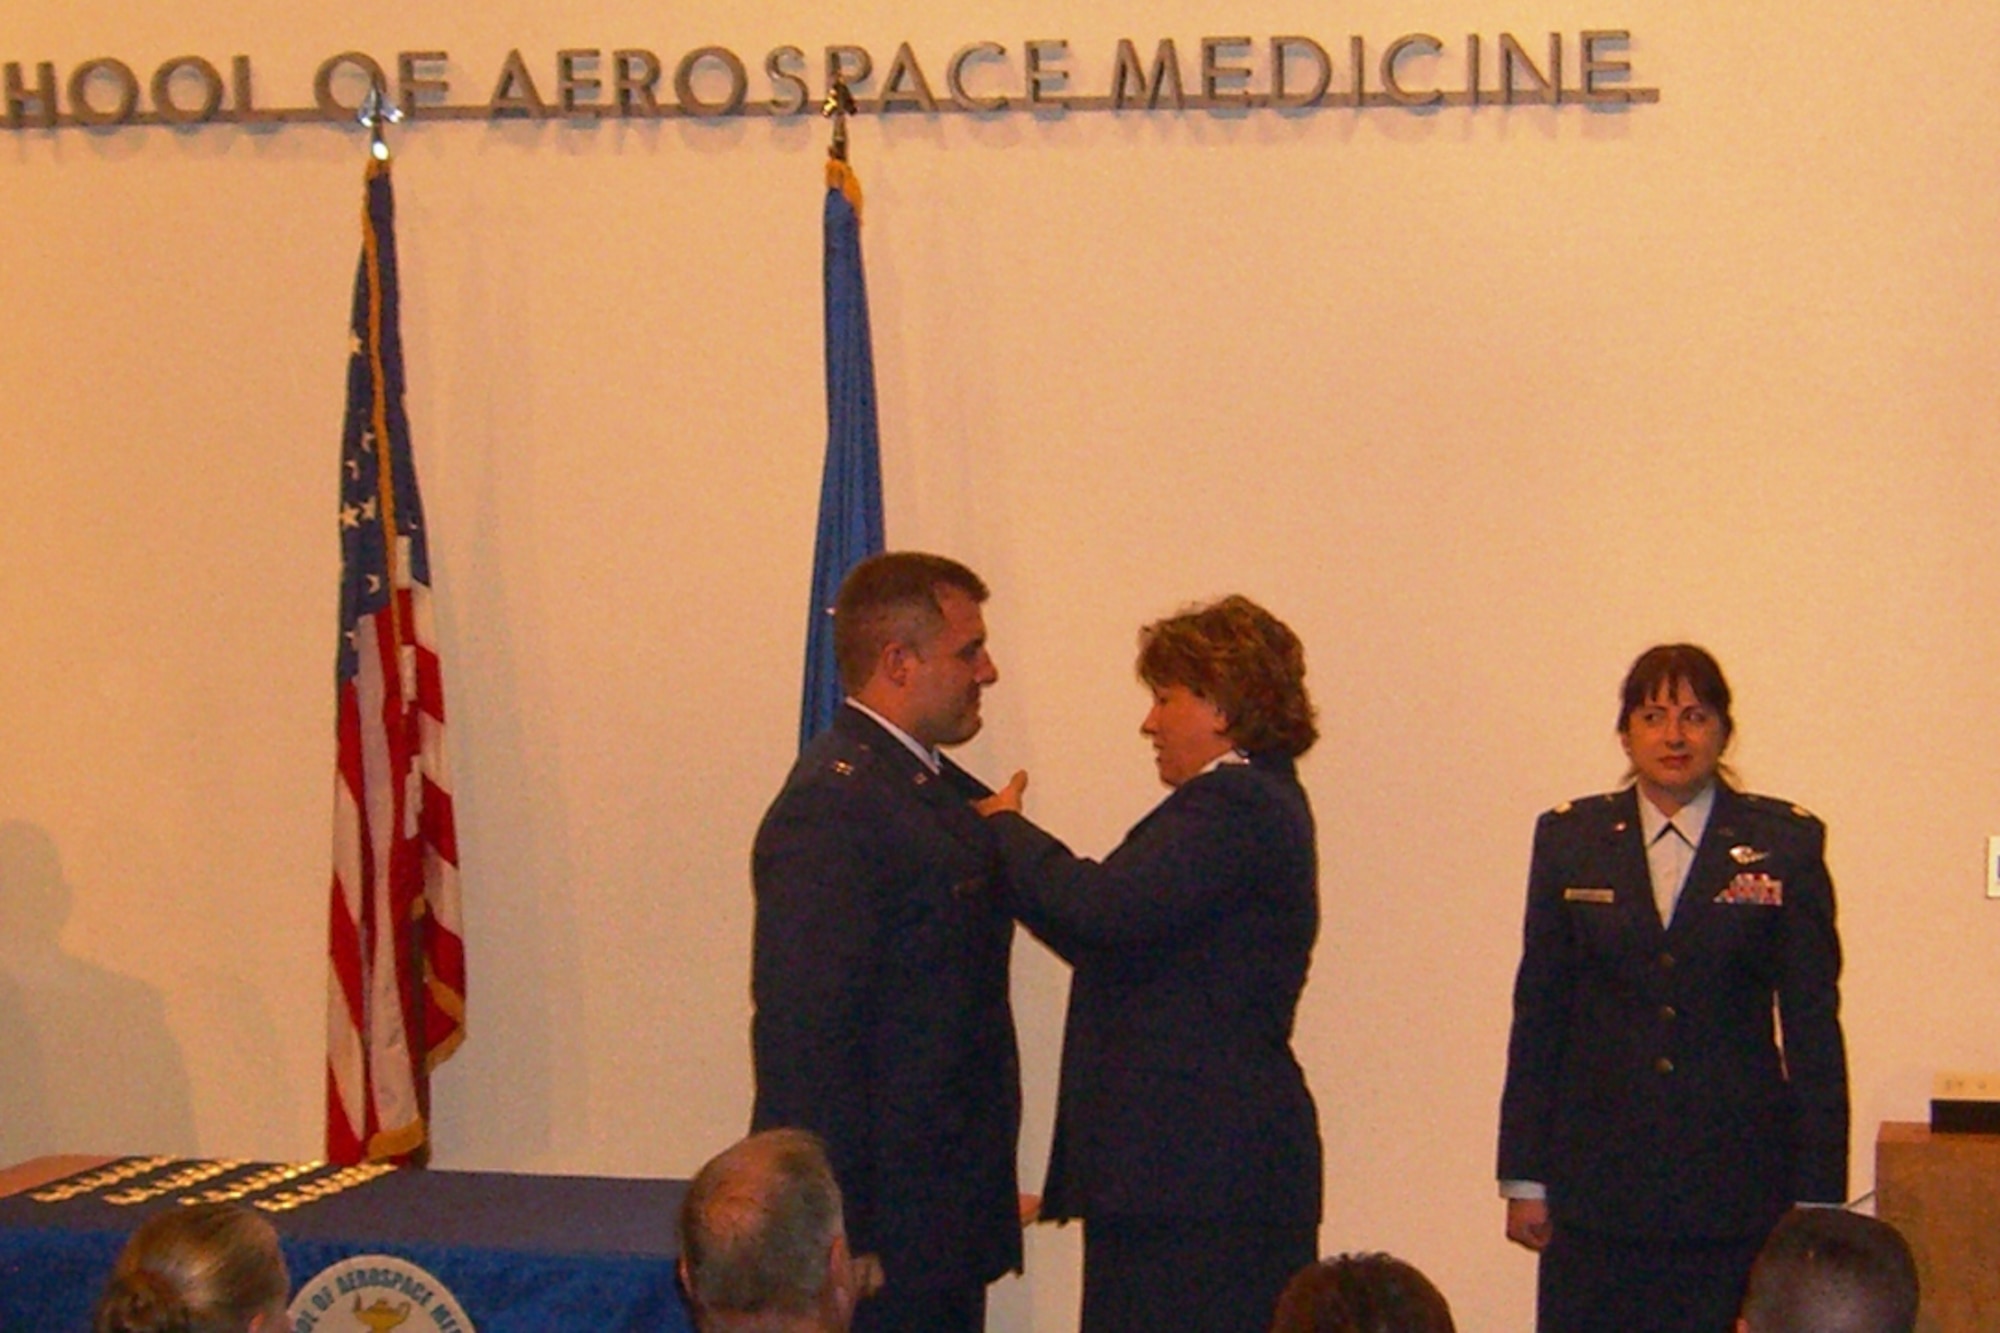 More than 300 guests filled the auditorium at The USAF School of Aerospace Medicine as the final class of students at Brooks City-Base in San Antonio, TX, graduated on Jan. 29. Each of the Aeromedical Evacuation crew members received their “wings”, the uniform emblem that identifies them as a member of the elite Flight Nurse and Aeromedical Evacuation team.  As the wings were pinned on, many times by a family member or a superior officer, each recipient’s pride was obvious. Among the attendees gathered to witness the historic event were the families of the graduating class, flight nurses from around the world, past instructors, USAFSAM alumni, and local community guests.  The school is in the process of relocating to a new state-of-the-art facility at Wright-Patterson AFB, Ohio, under the 2005 Base Realignment and Closure initiative. Photo By: Mary Kay Stewart